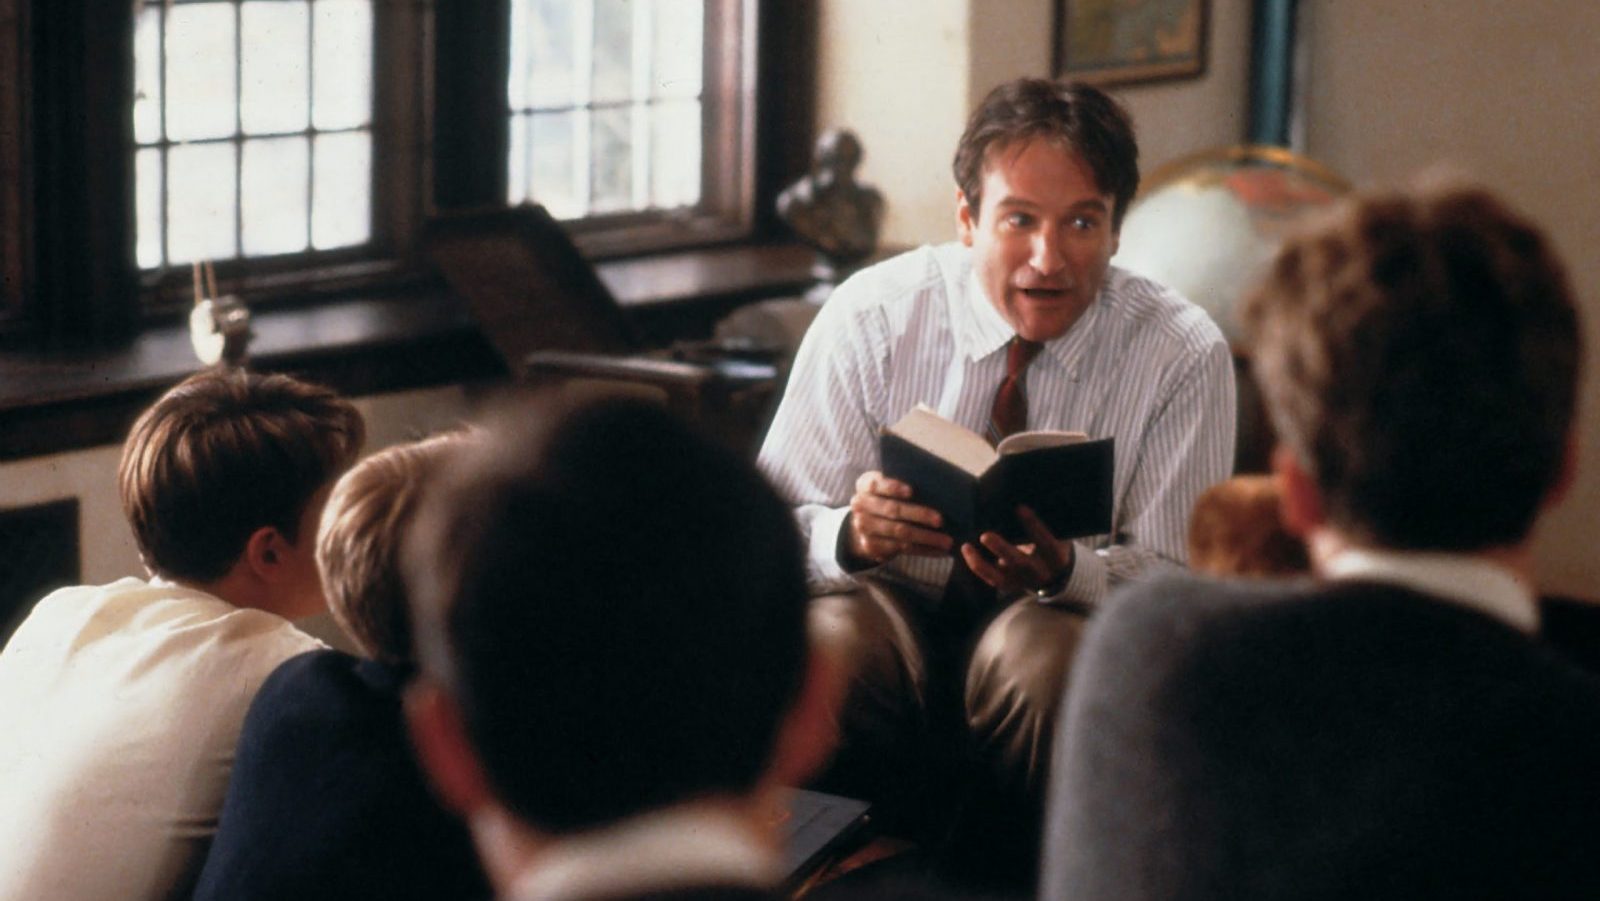 <p><em>Dead Poets Society</em> centers around a boys-only boarding school in the late 50’s, and their new teacher in their poetry class. The movie is mostly driven by the conversations between the boys, the boys and their fathers, and the boys and their teacher. But even more than the conversations within the movie, this one will spark conversations, especially among parents, teachers and teens about the importance of the arts, honesty, and pursuing the subjects that come most naturally to us.</p>